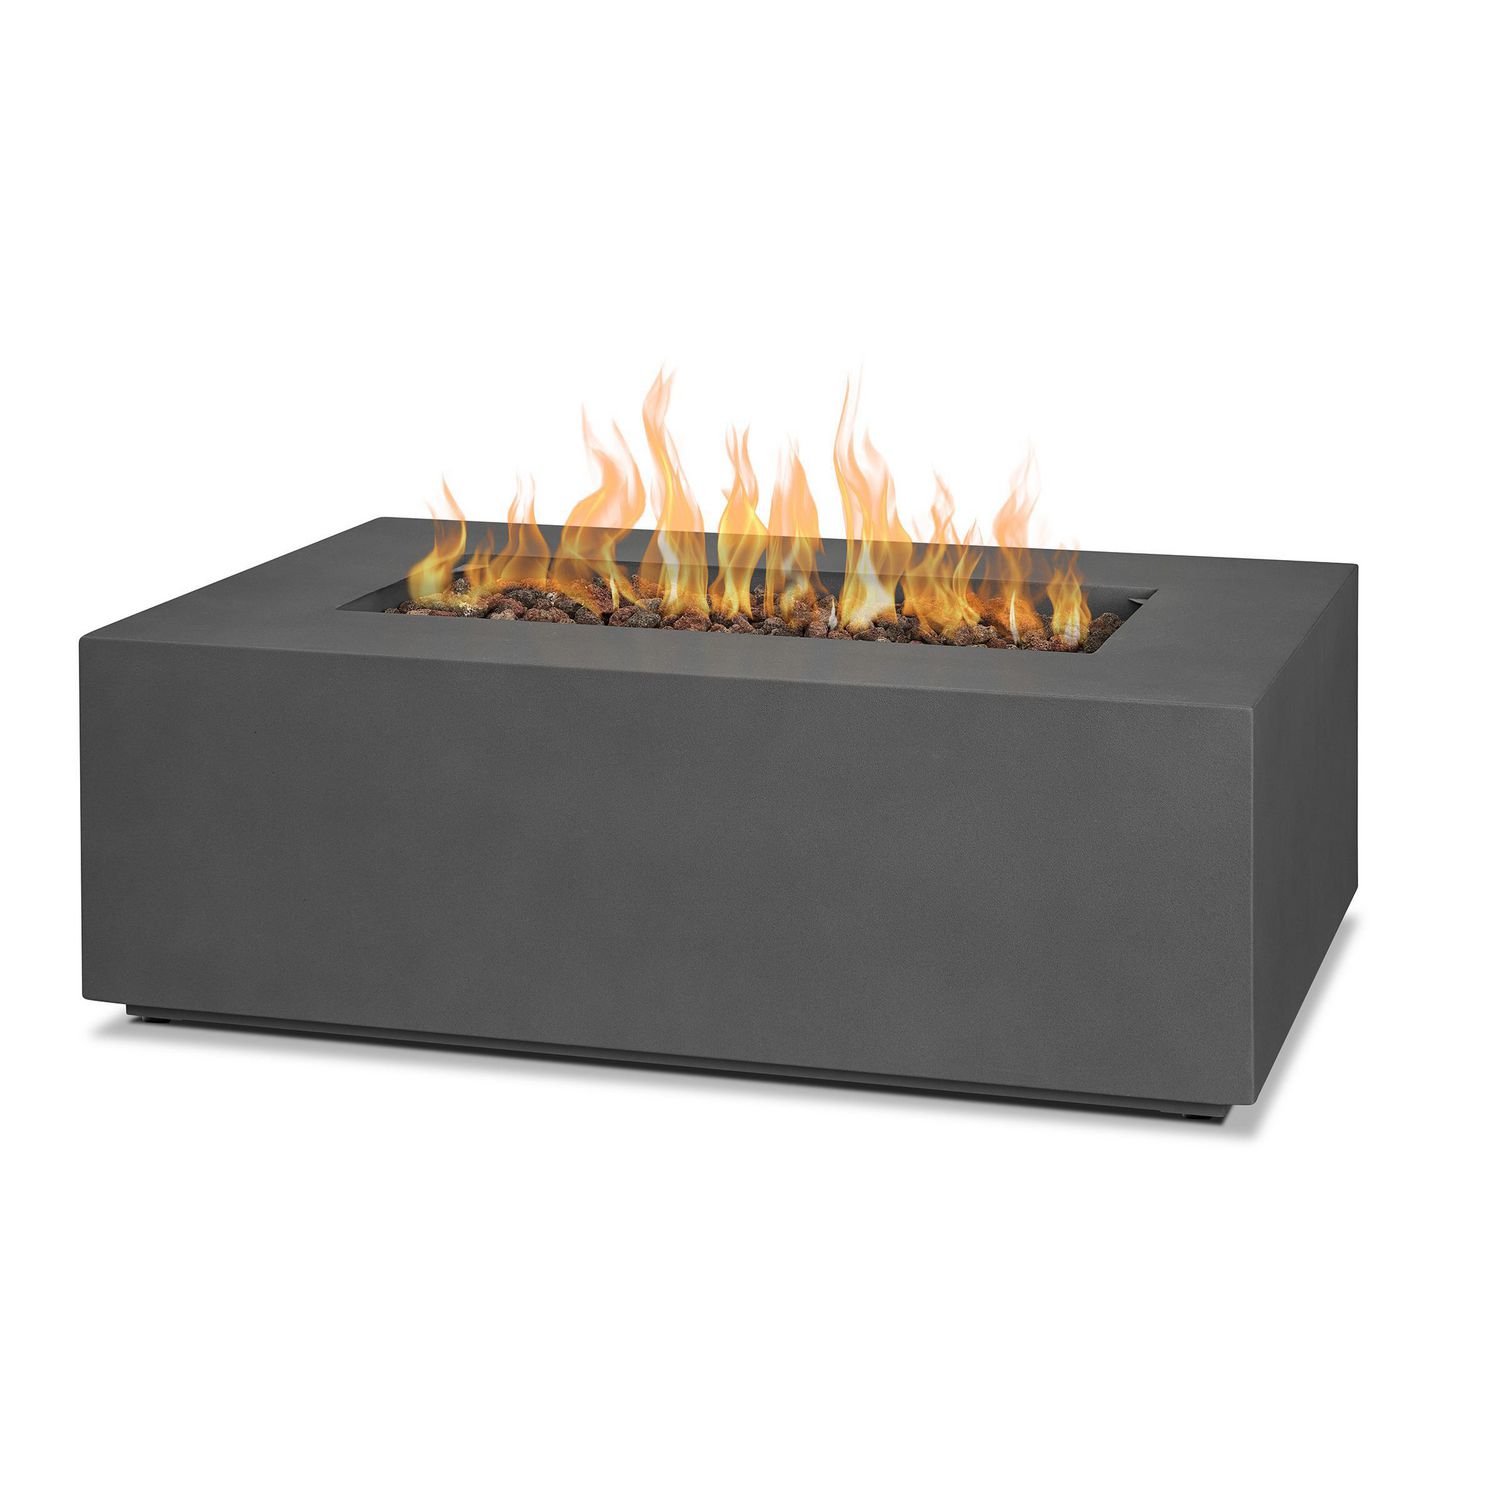 Aegean Small Rectangle Propane Gas Fire, How To Convert Propane Natural Gas Fire Pit